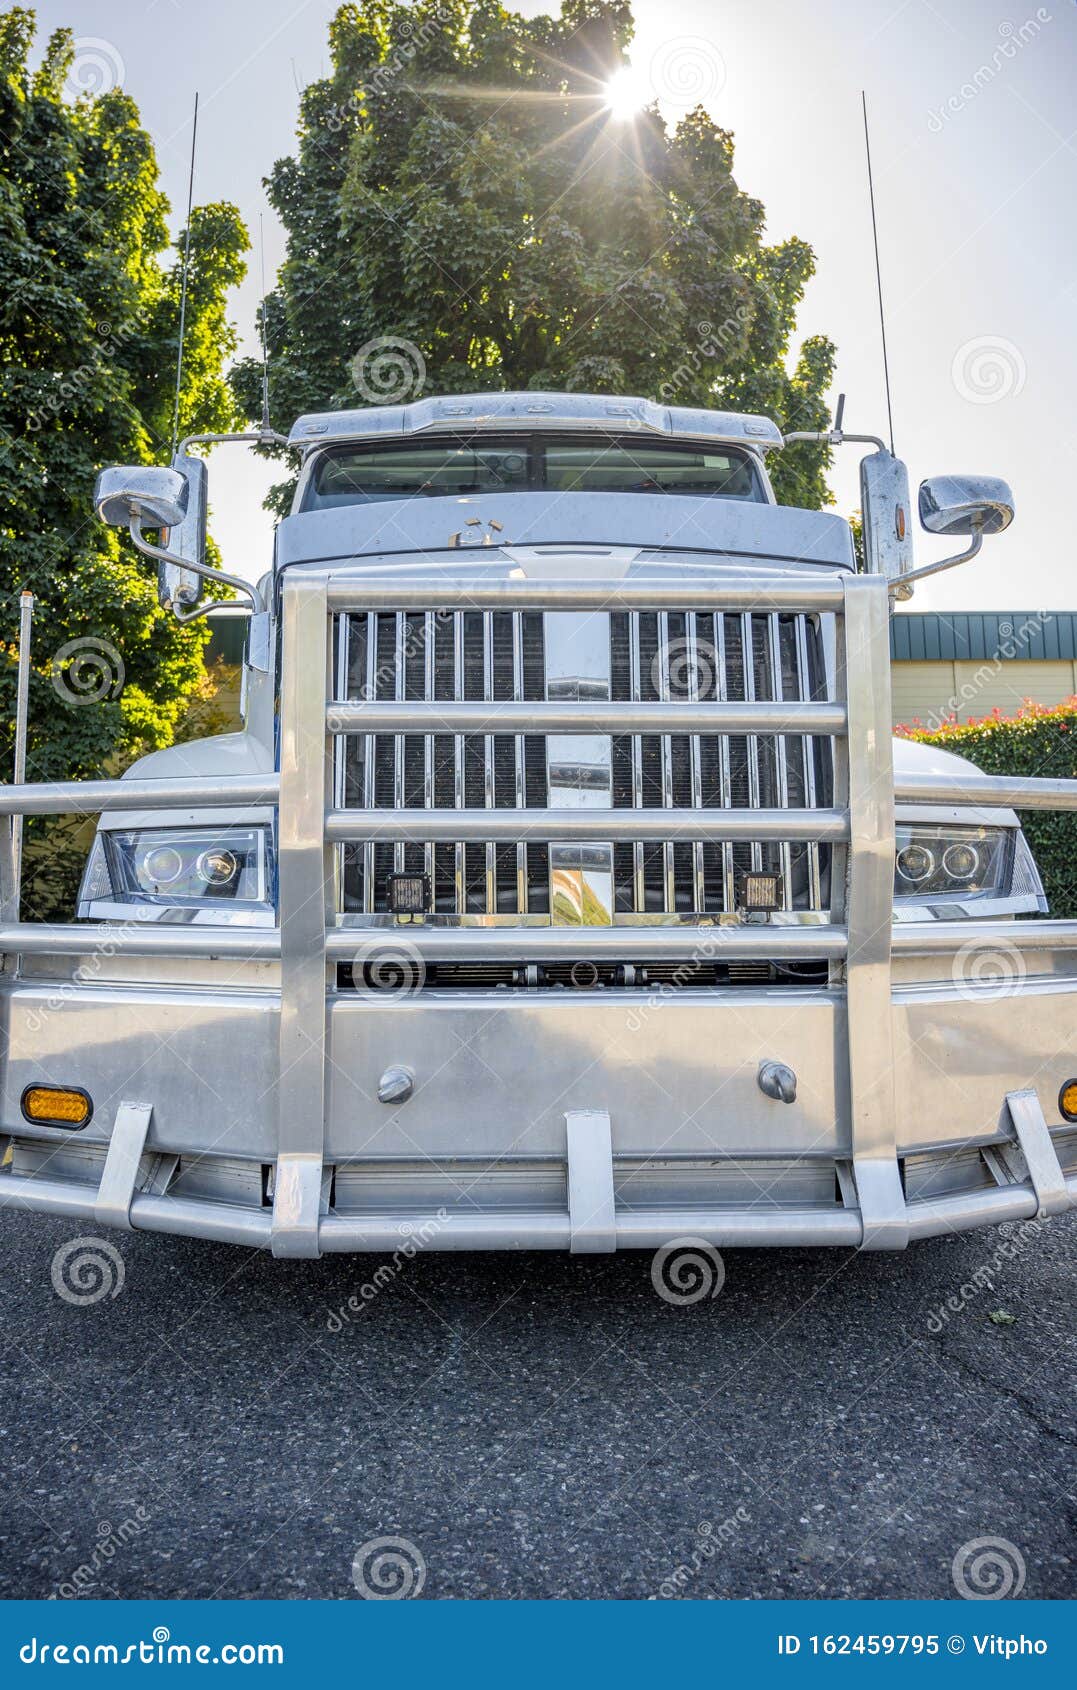 https://thumbs.dreamstime.com/z/front-big-rig-semi-truck-tractor-powerful-grille-bumper-guard-rest-stop-parking-lot-sunshine-bright-white-chrome-162459795.jpg